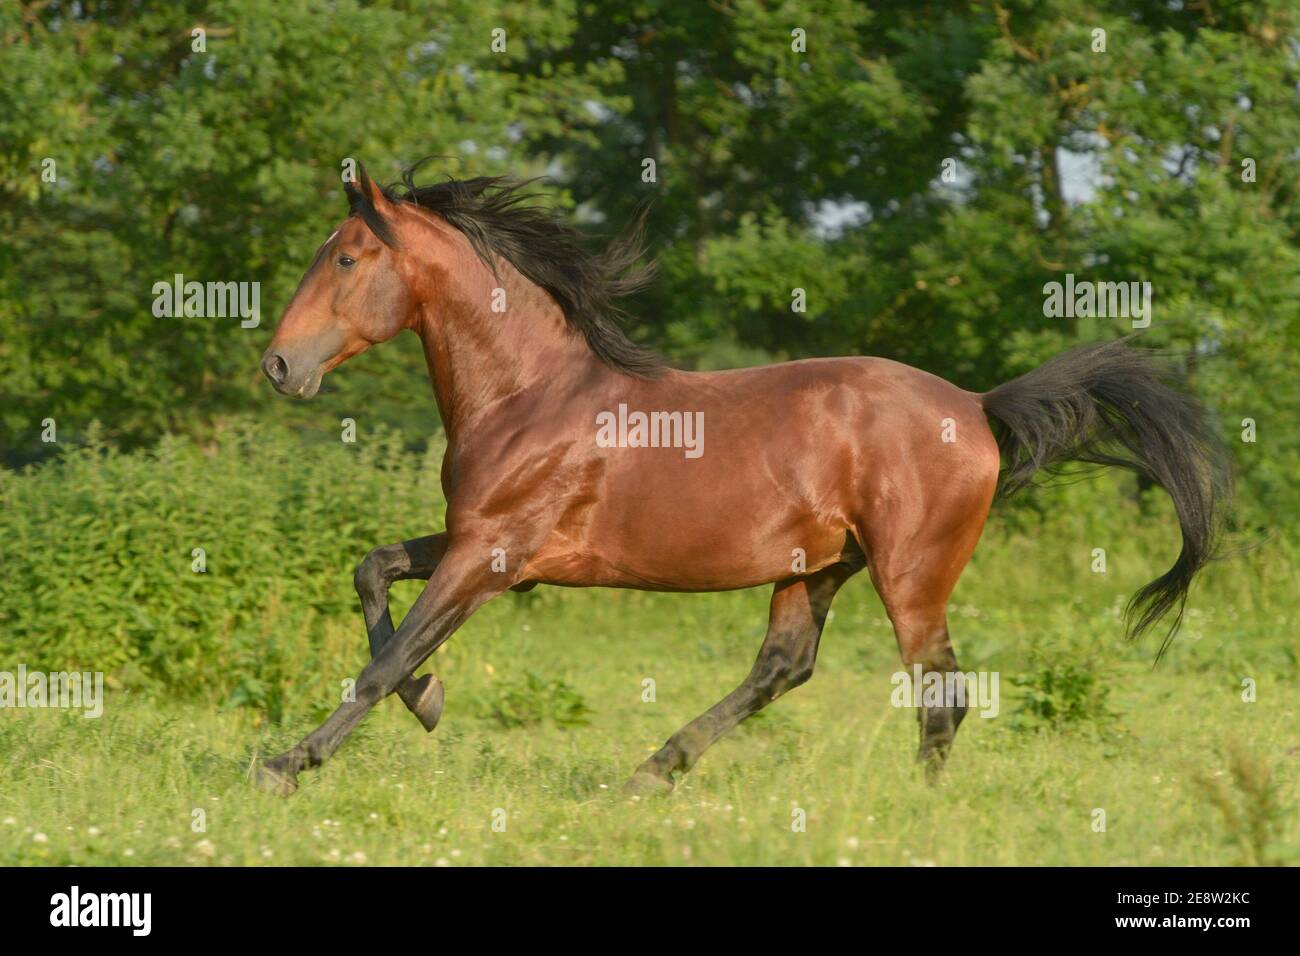 Andulisan PRE stallion galloping in the field Stock Photo